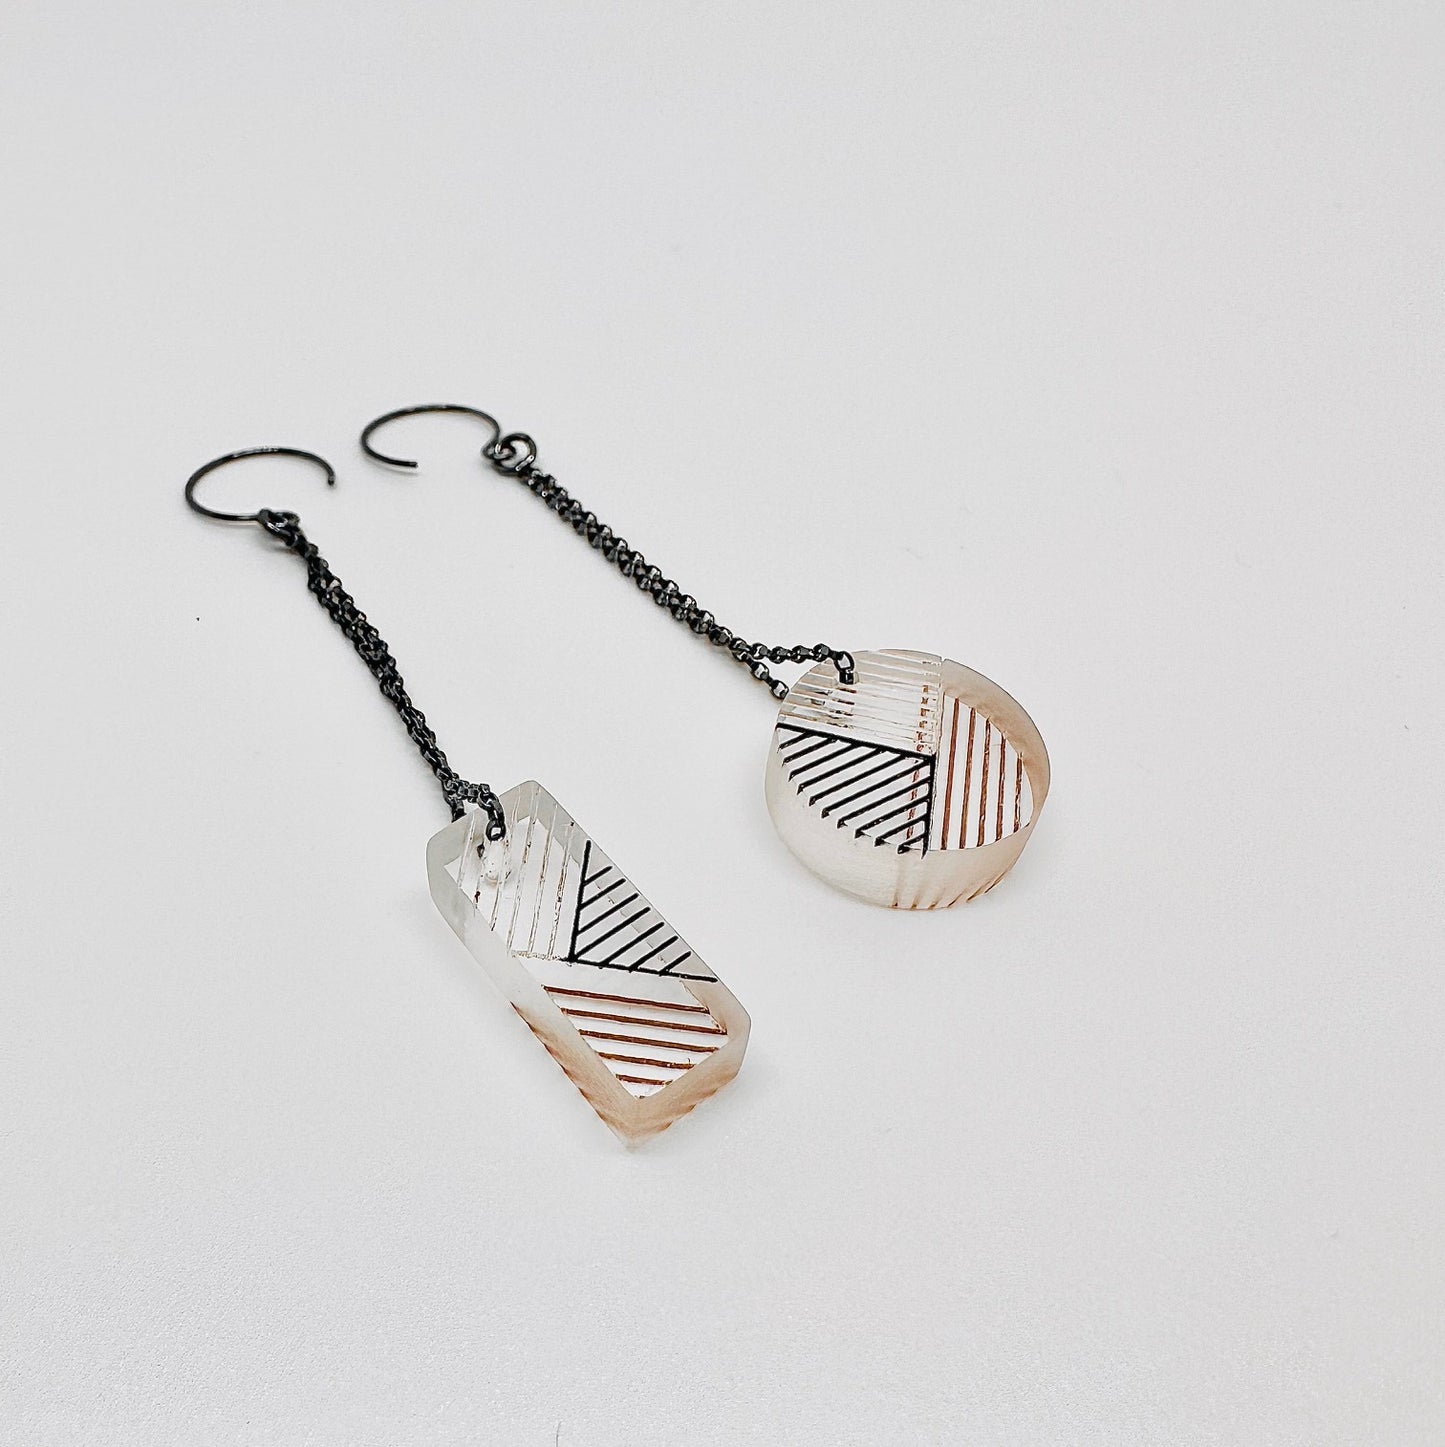 Osa/Oda Earrings (Mis-Matched Geometric Dangle) - one set. Transparent handpainted acrylic, dangling from oxidized sterling silver {s} Rolo chain. Measure approximately .5” w x 3.5" l with chain. 

